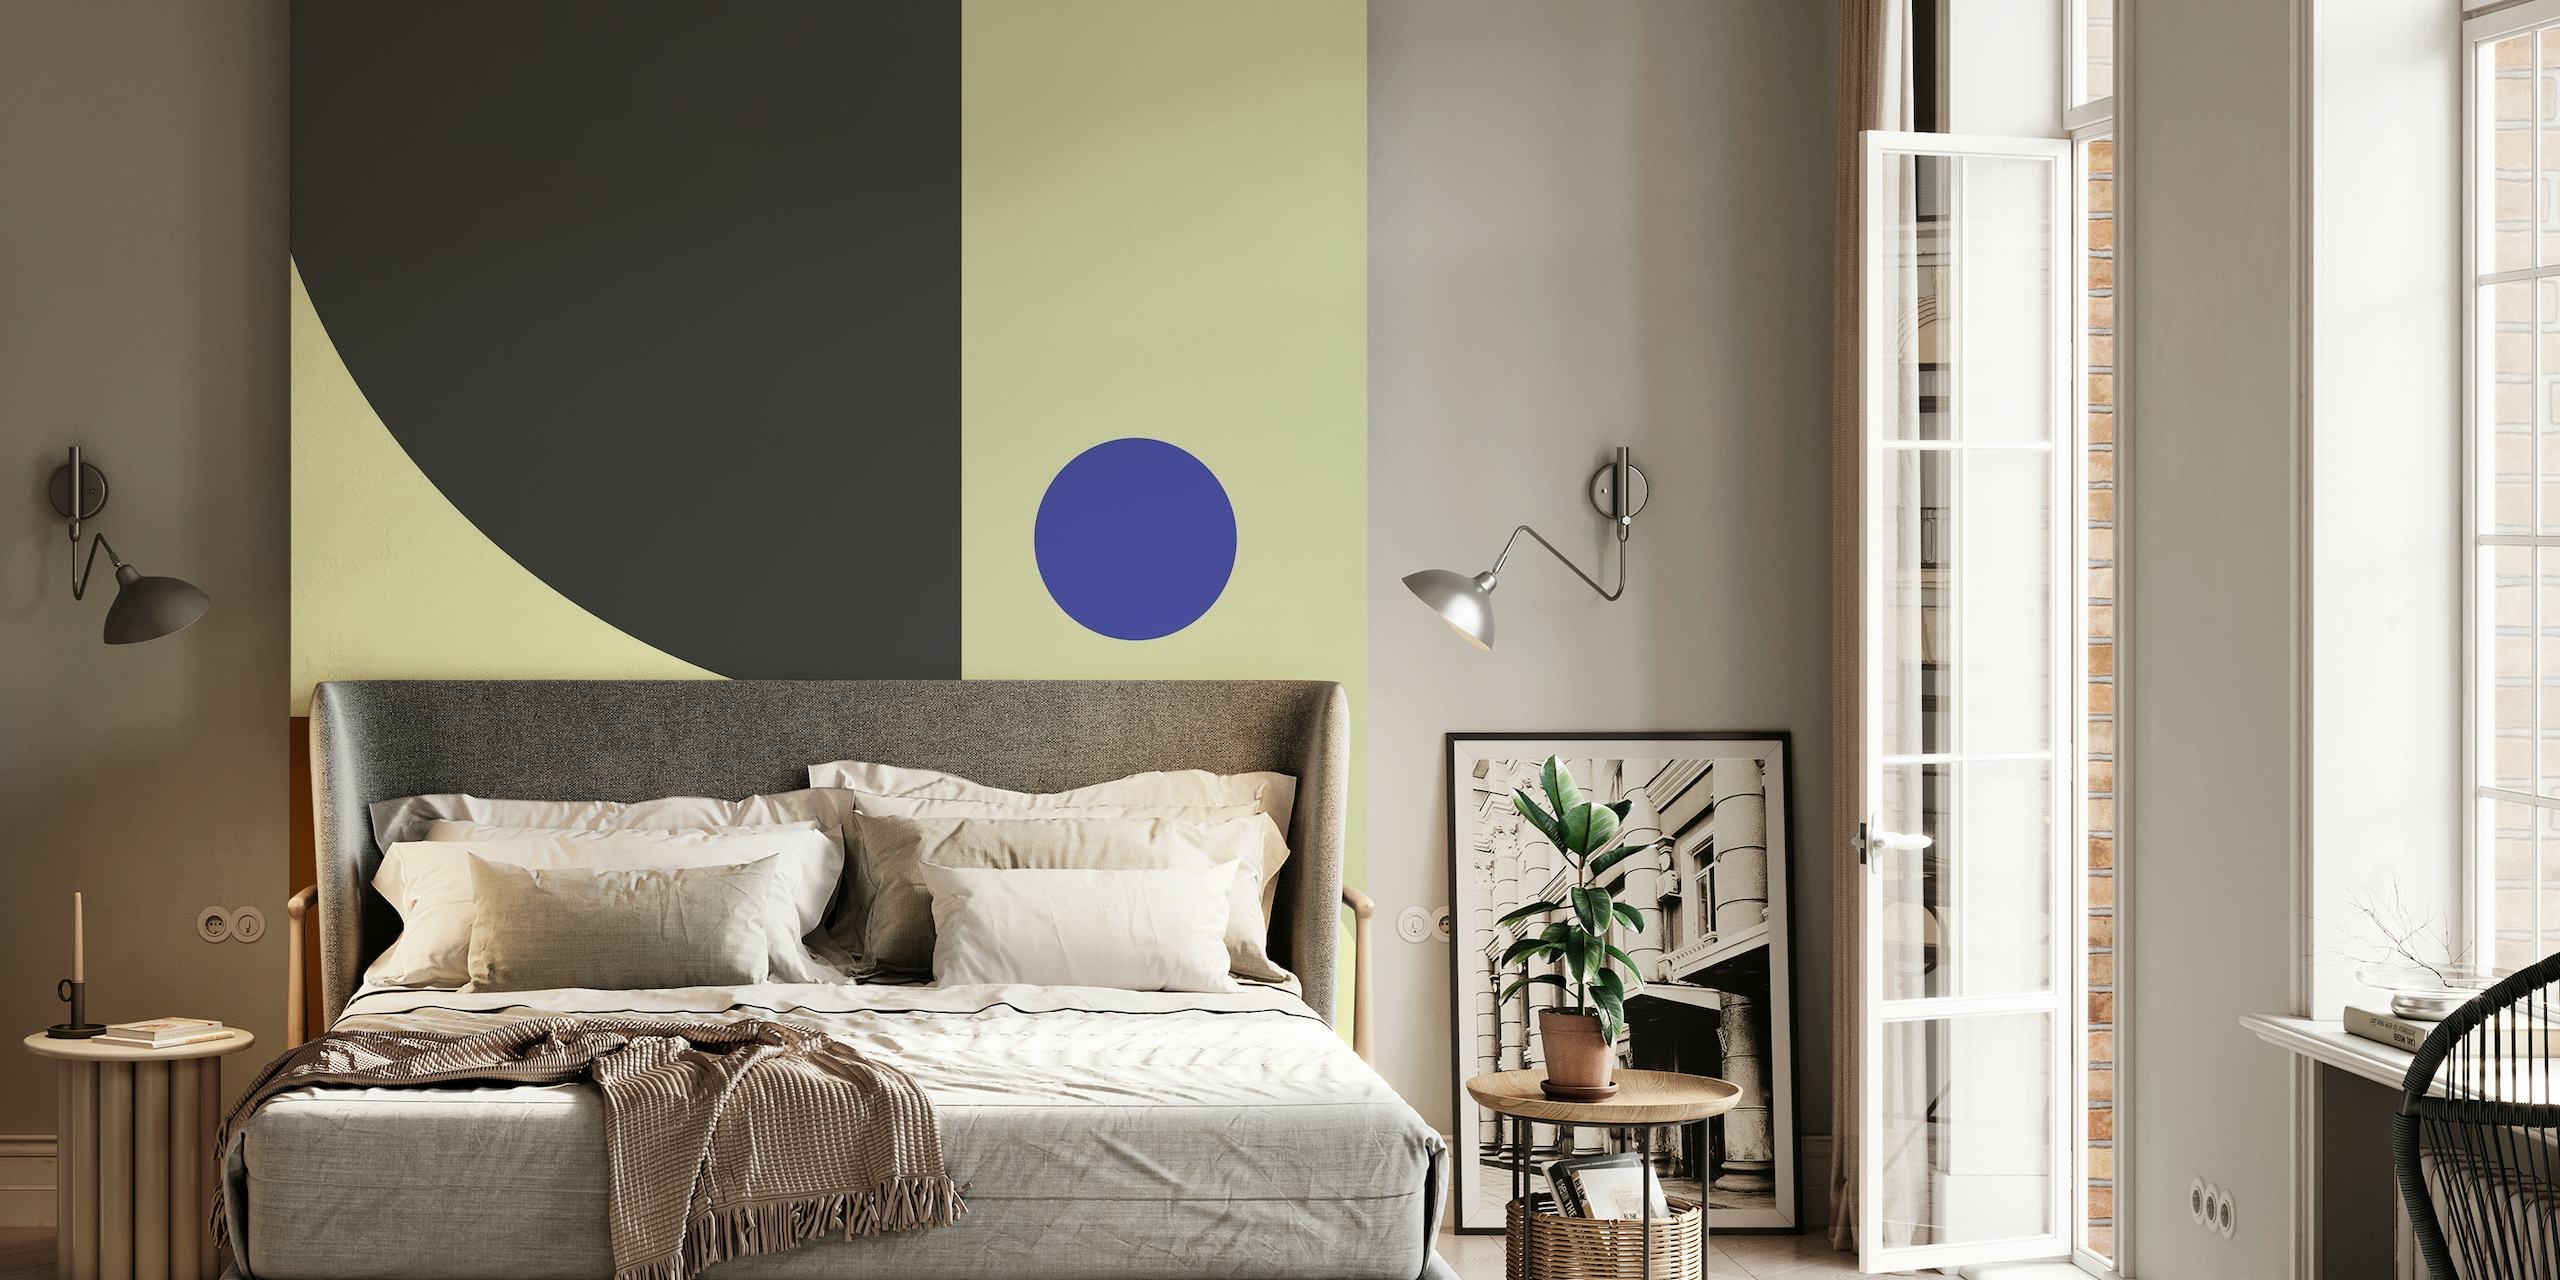 Abstract geometric shapes wall mural with cream, navy blue, and warm earth tones